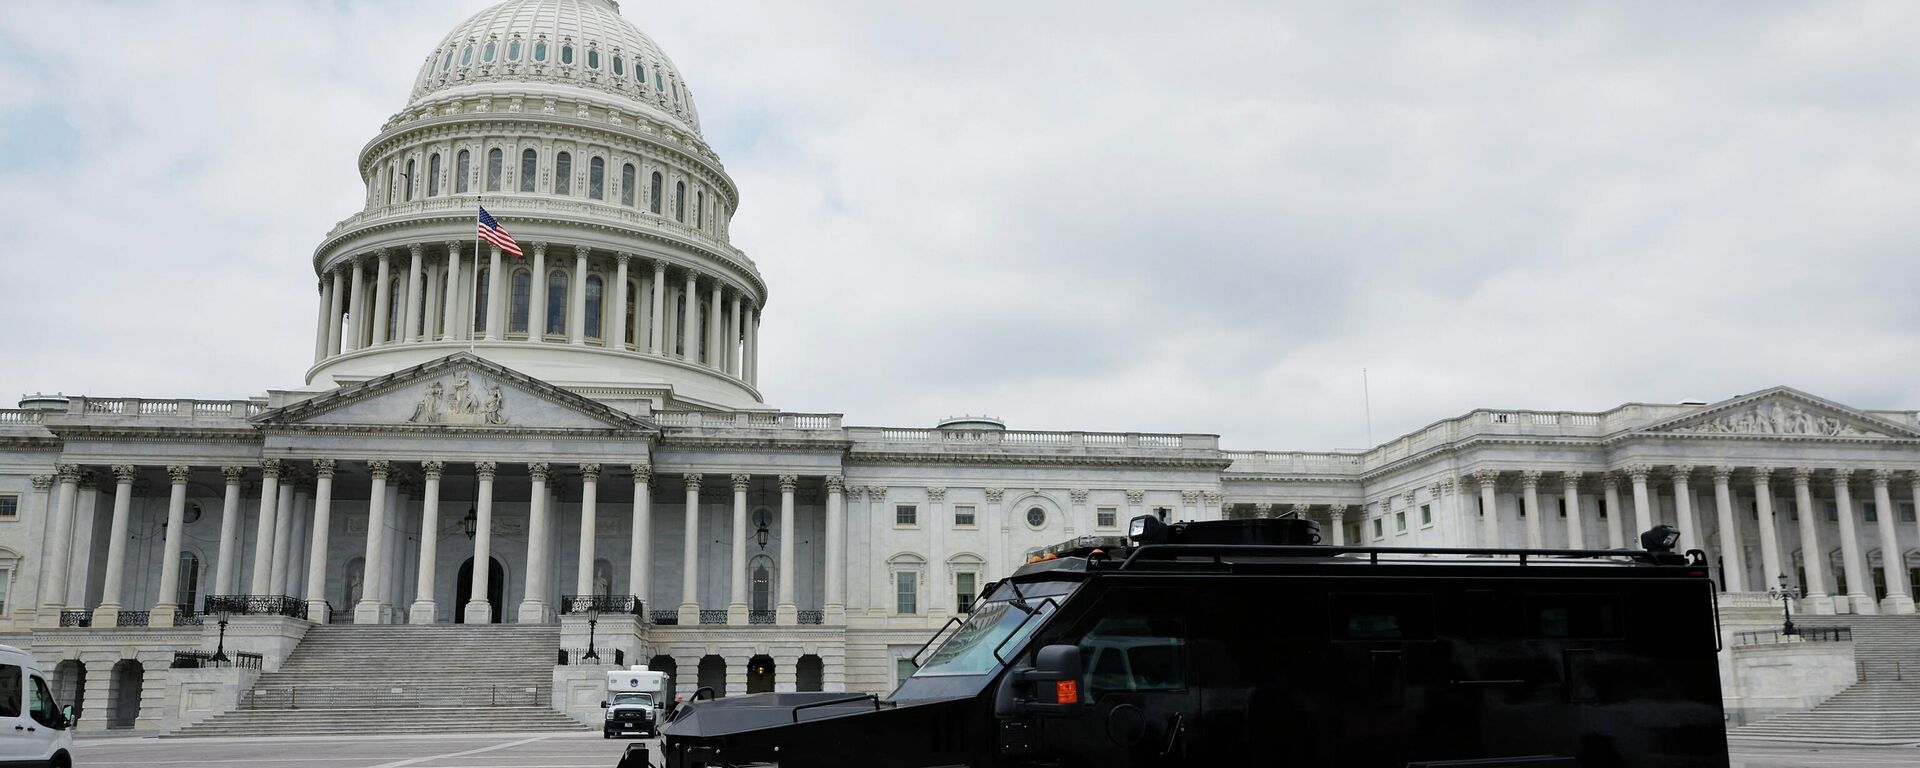 WASHINGTON, DC - JUNE 23: An armored police vehicle is positioned on the plaza between the U.S. Capitol and the Supreme Court after the court handed down its decision in Dobbs v Jackson Women's Health on June 24, 2022 in Washington, DC.  - Sputnik International, 1920, 24.06.2022